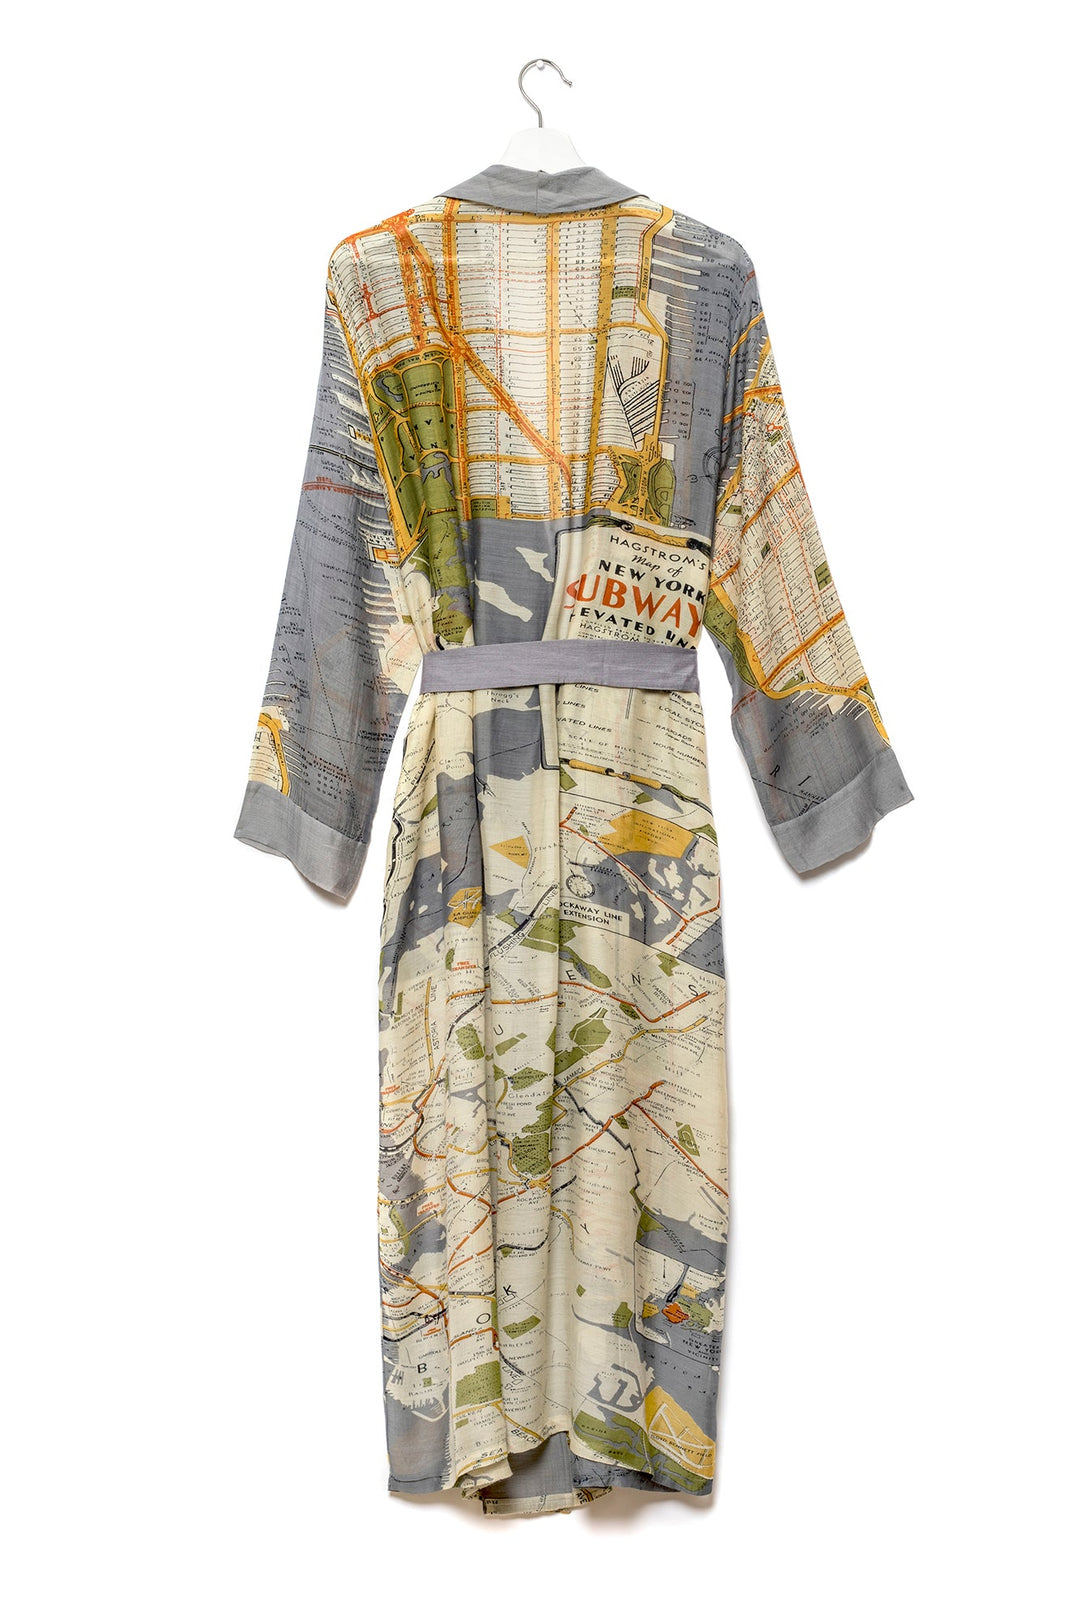 New York City Grey Map Gown